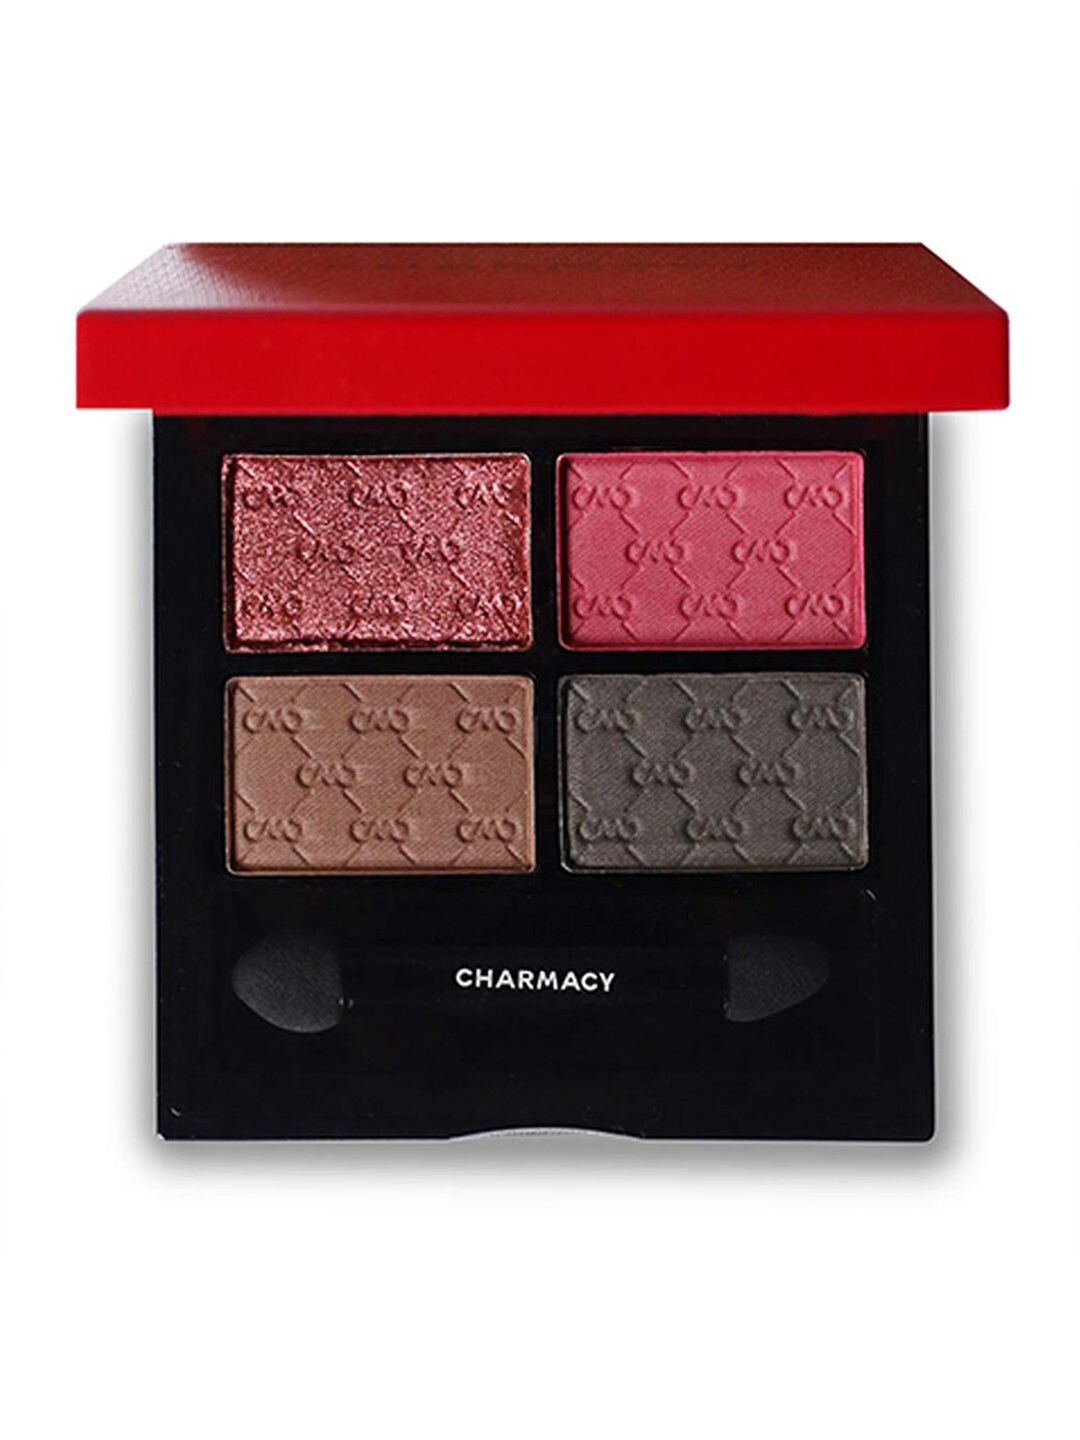 Charmacy Milano Gradient Eyeshadow Palette - 03, 7.2 g Price in India